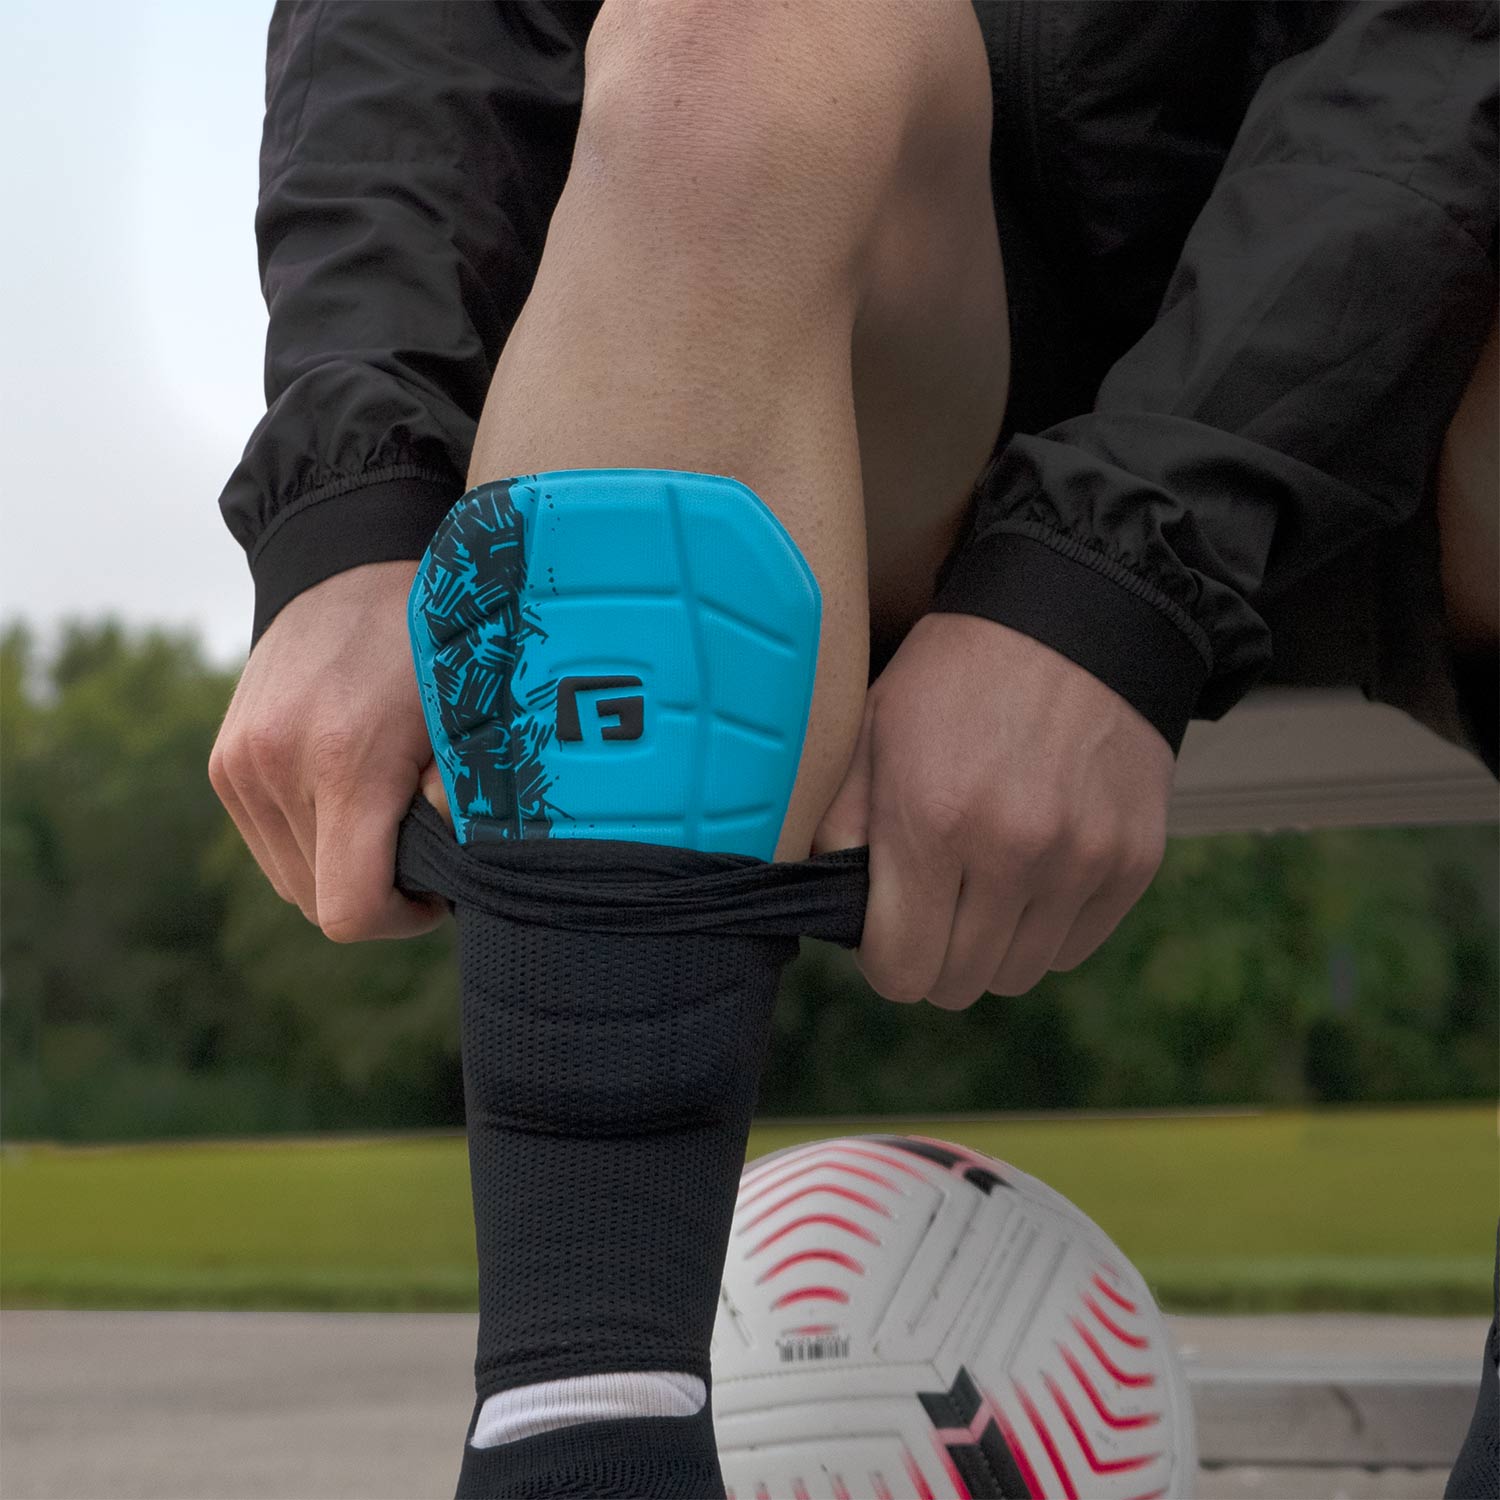 Pro-S Blade Soccer Shin Guards - Limited Edition